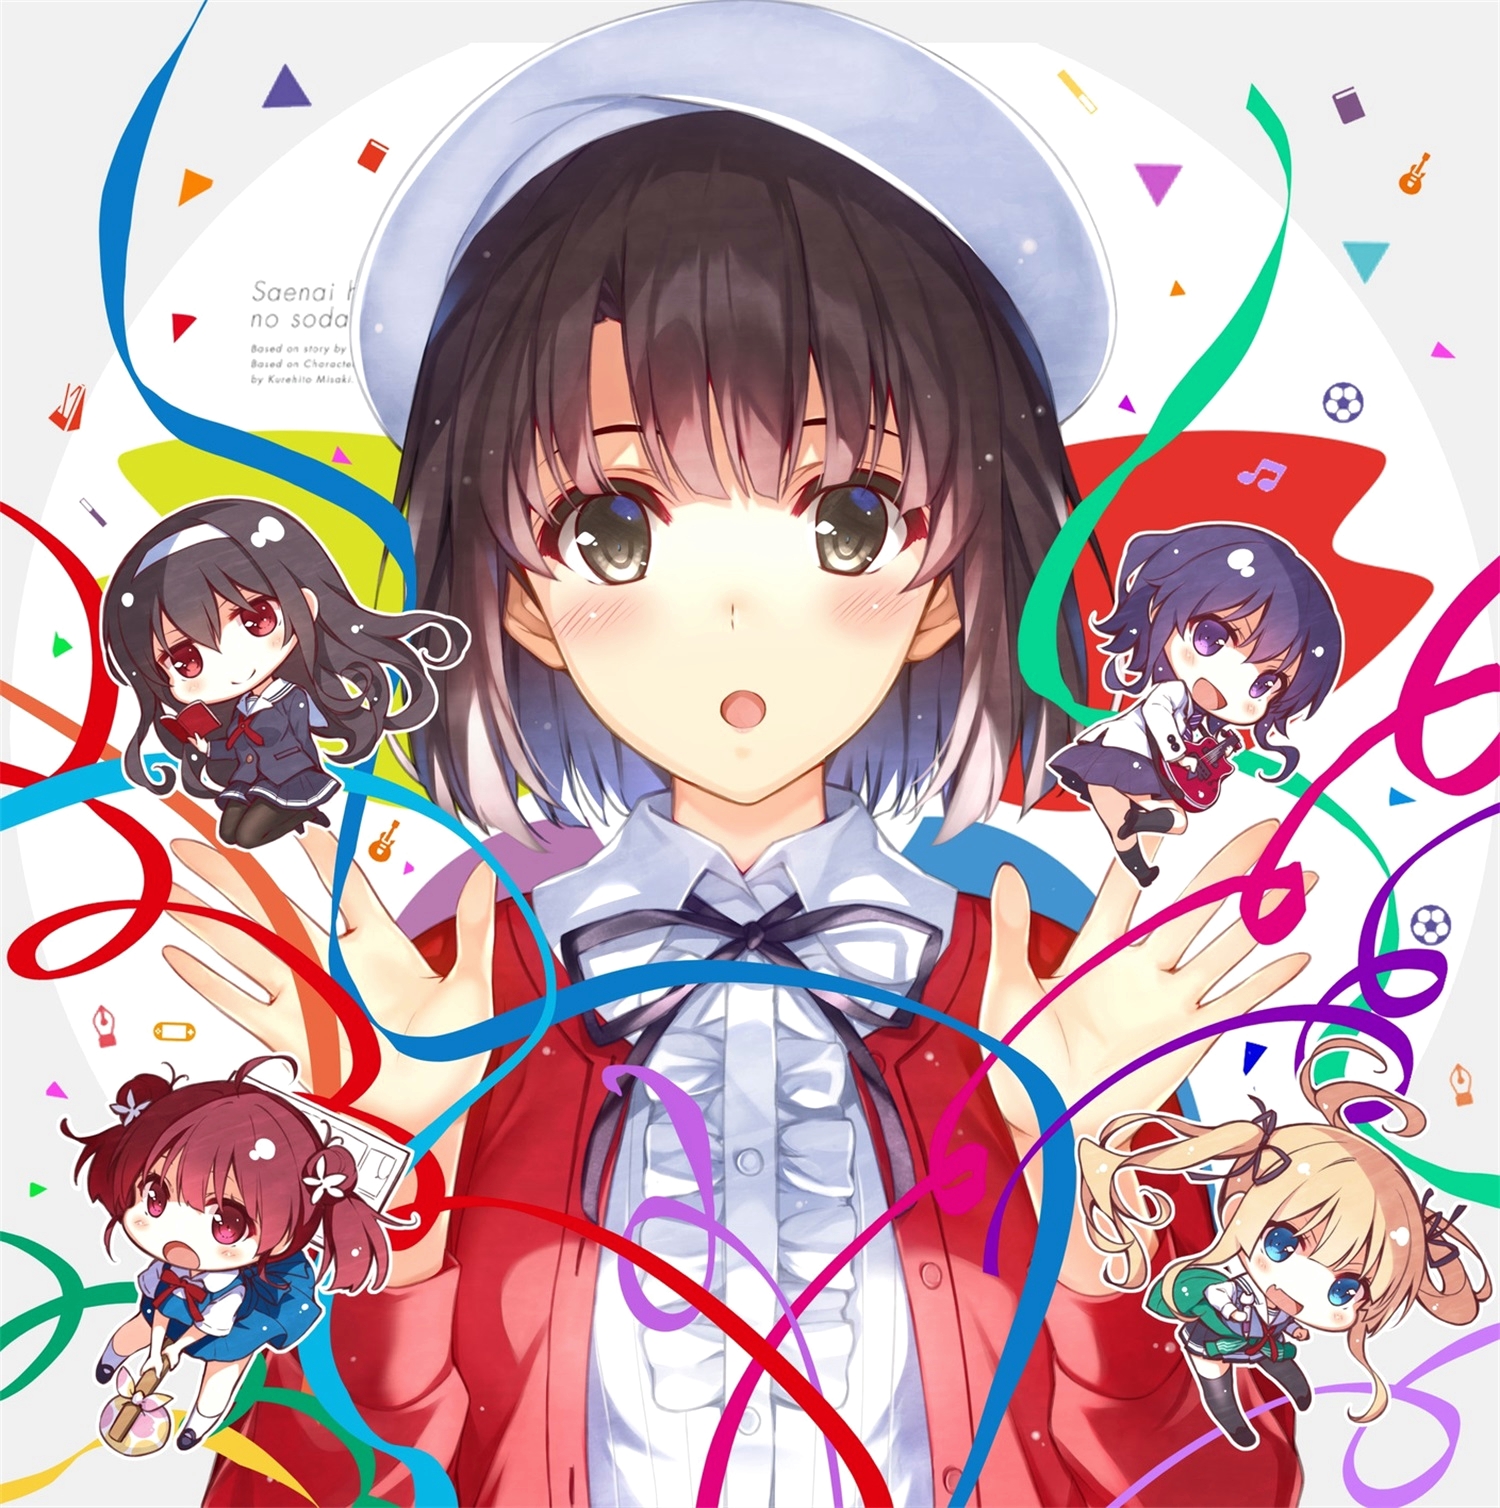 【FLAC】アニメ「冴えない彼女の育てかた」Character Song Collection／冴えない彼女の育てかた